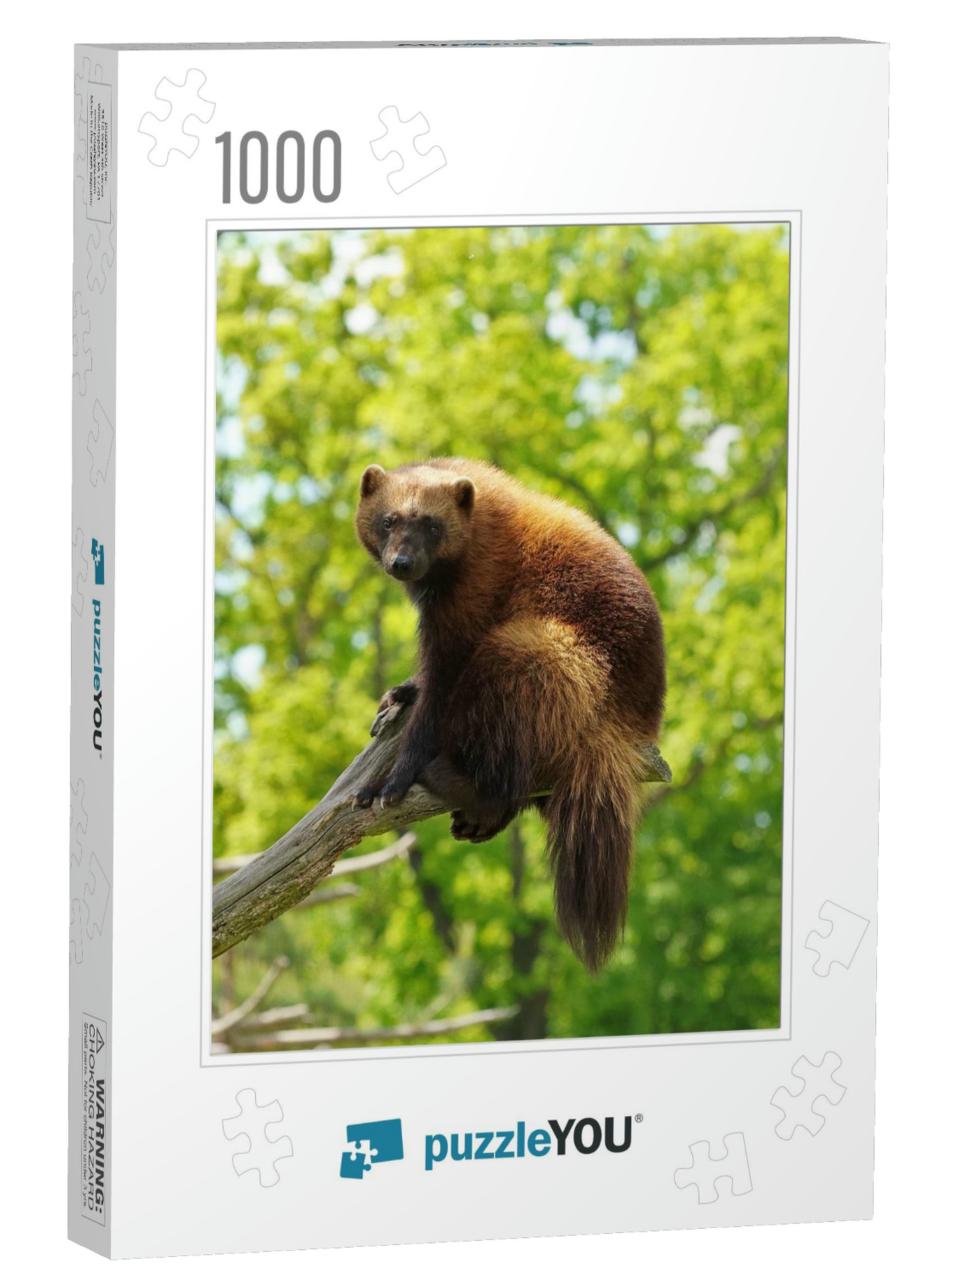 Wolverine Latin Name Gulo Gulo Resting High on a Branch... Jigsaw Puzzle with 1000 pieces